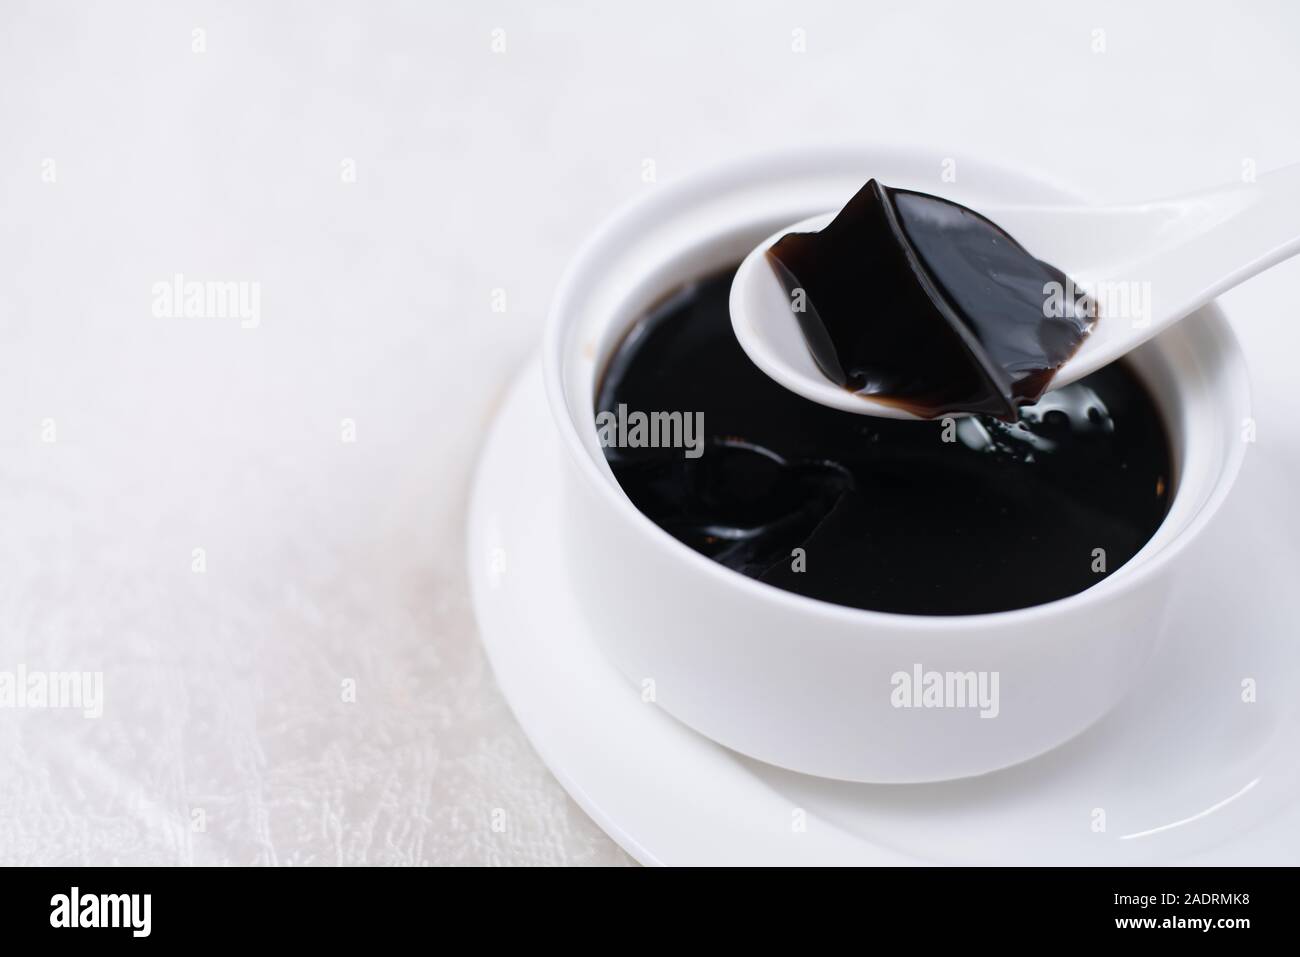 Grass jelly It's Southeast Asia Dessert made from made by boiling the aged and slightly oxidized stalks. Stock Photo